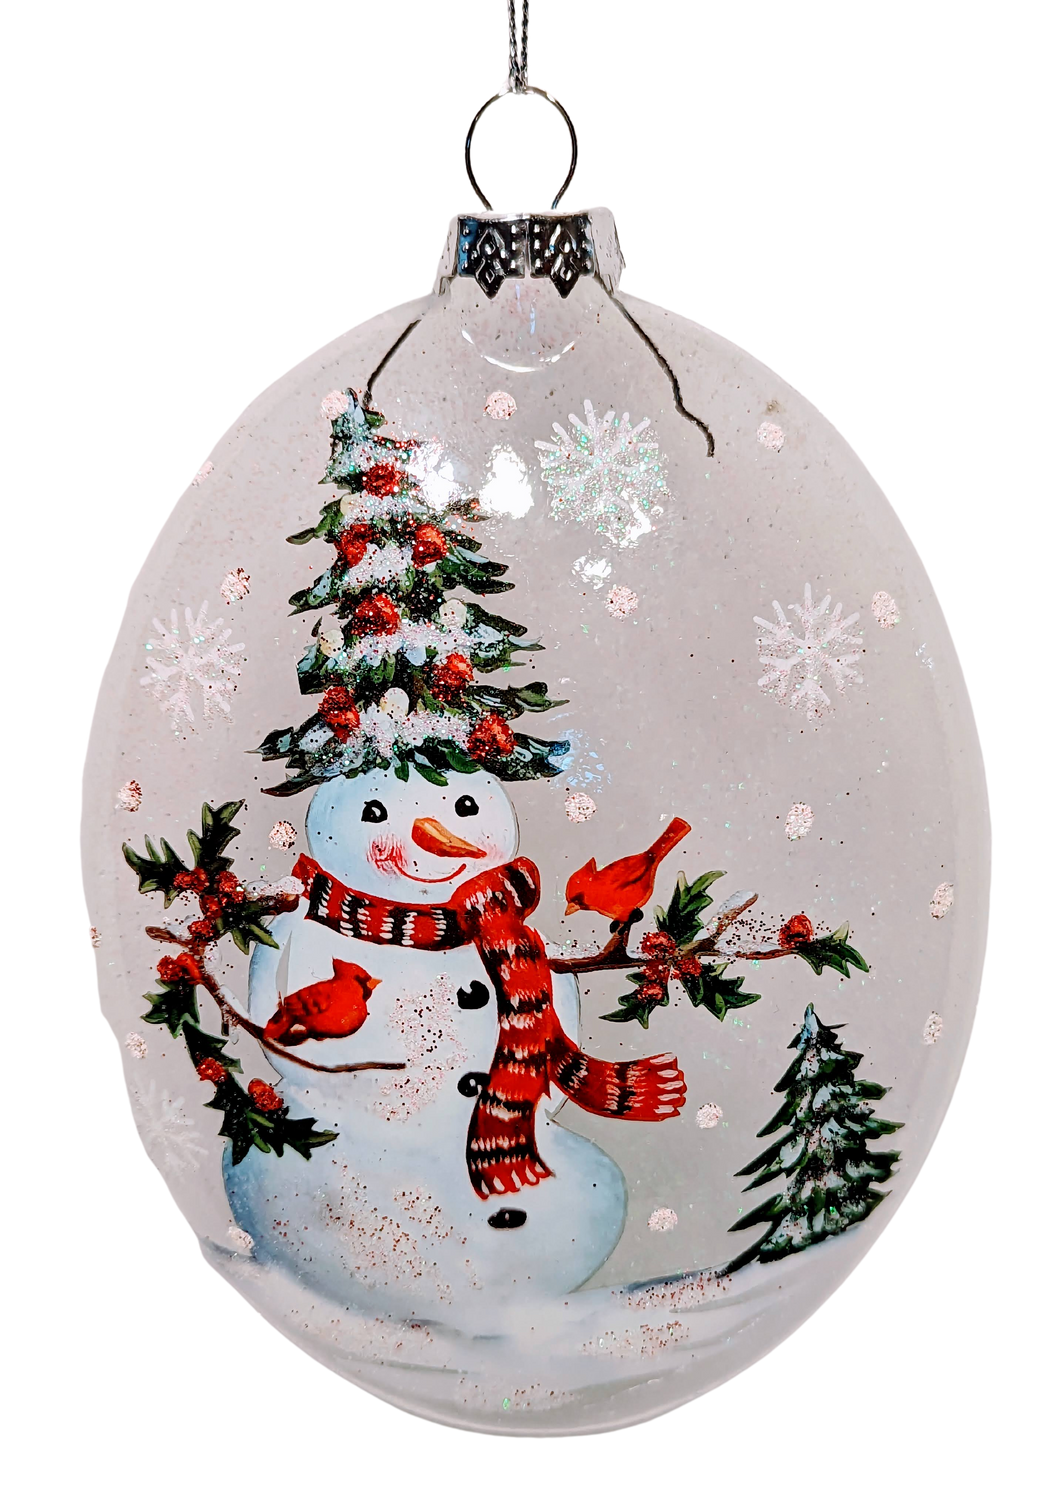 Glass Disc Snowman Ornament with Winter Scene & 2 Red Cardinals